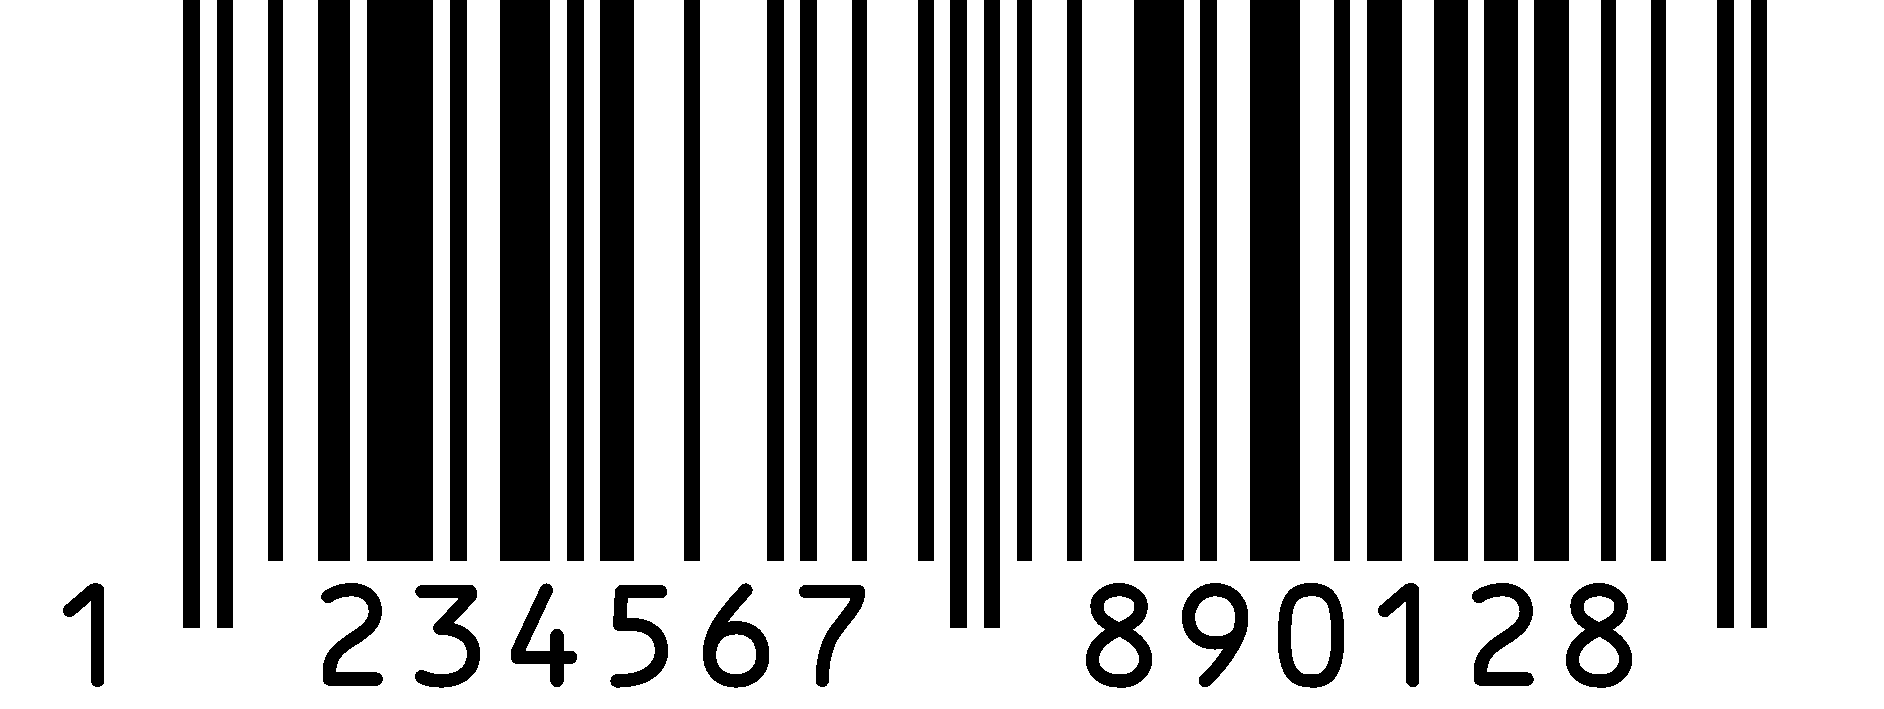 Create Barcodes with OCR Fonts